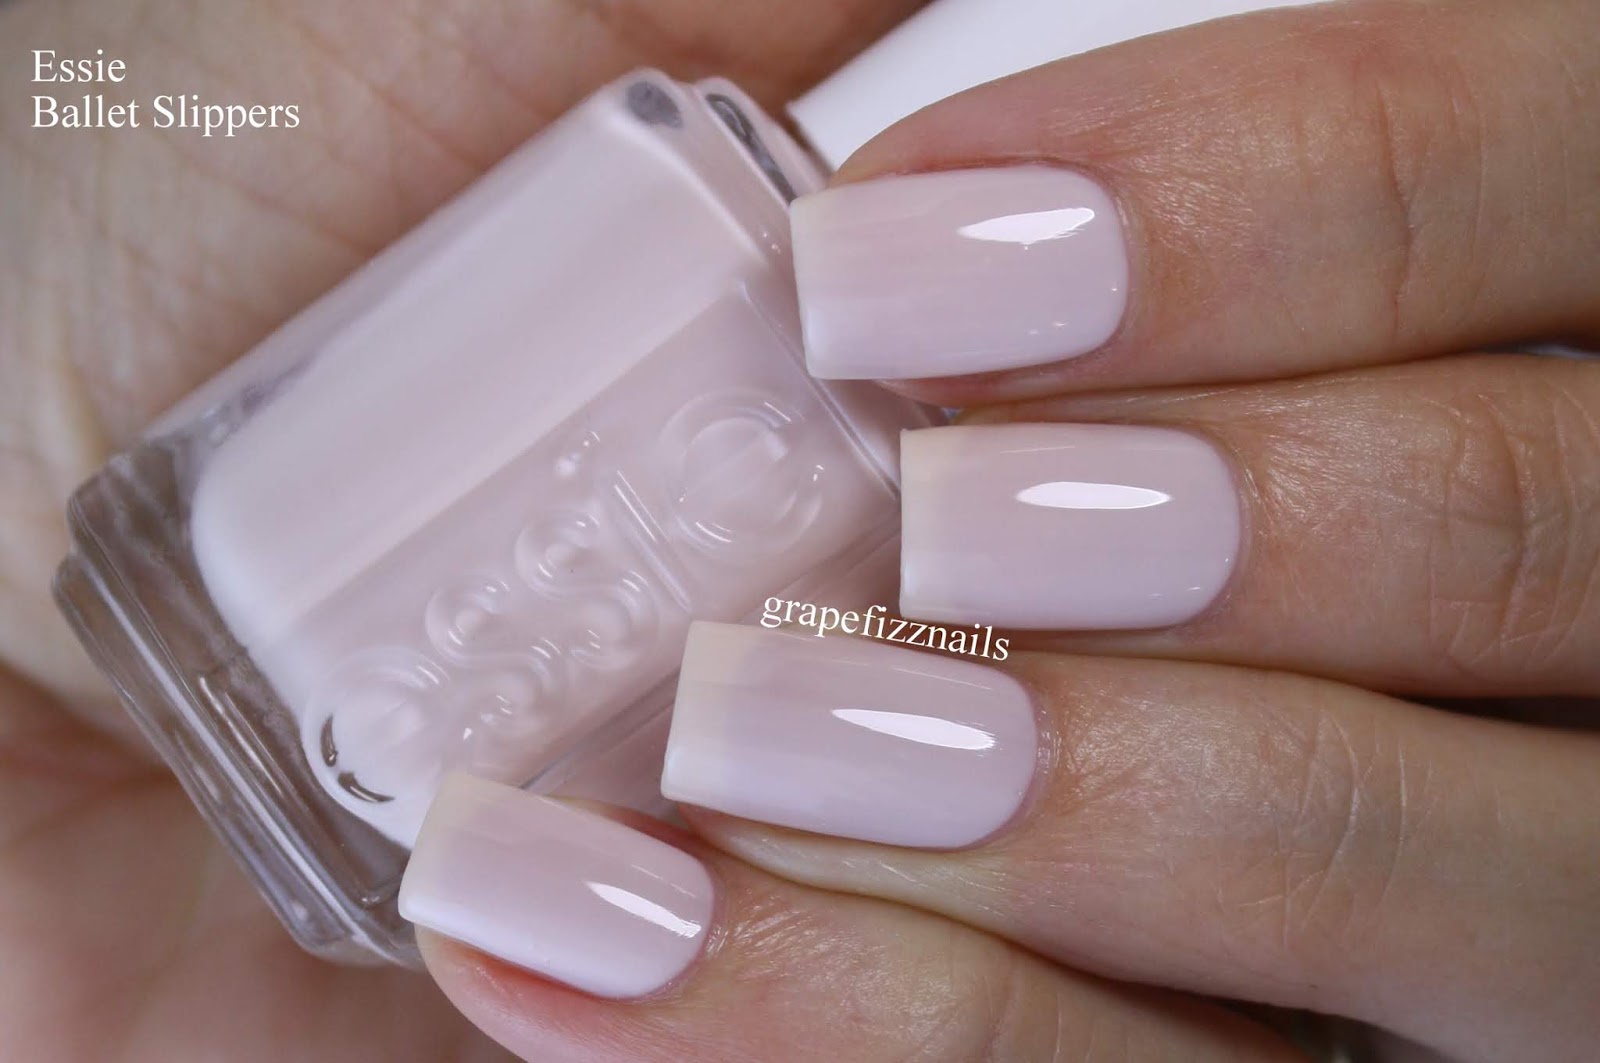 6. Essie Nail Polish in "Ballet Slippers" - wide 4